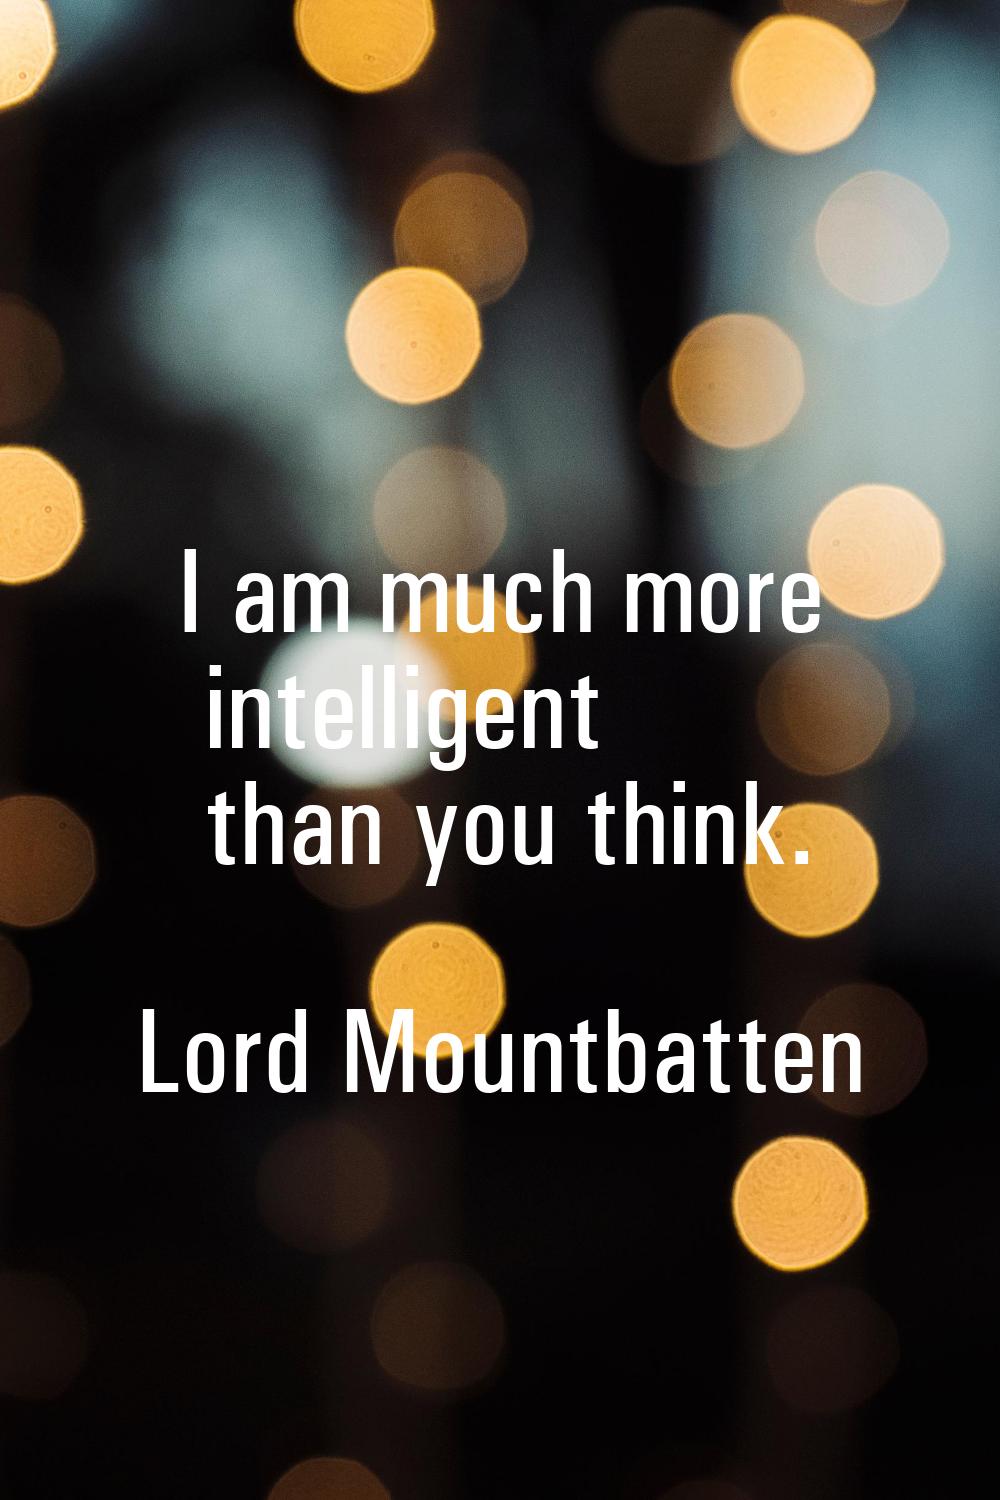 I am much more intelligent than you think.